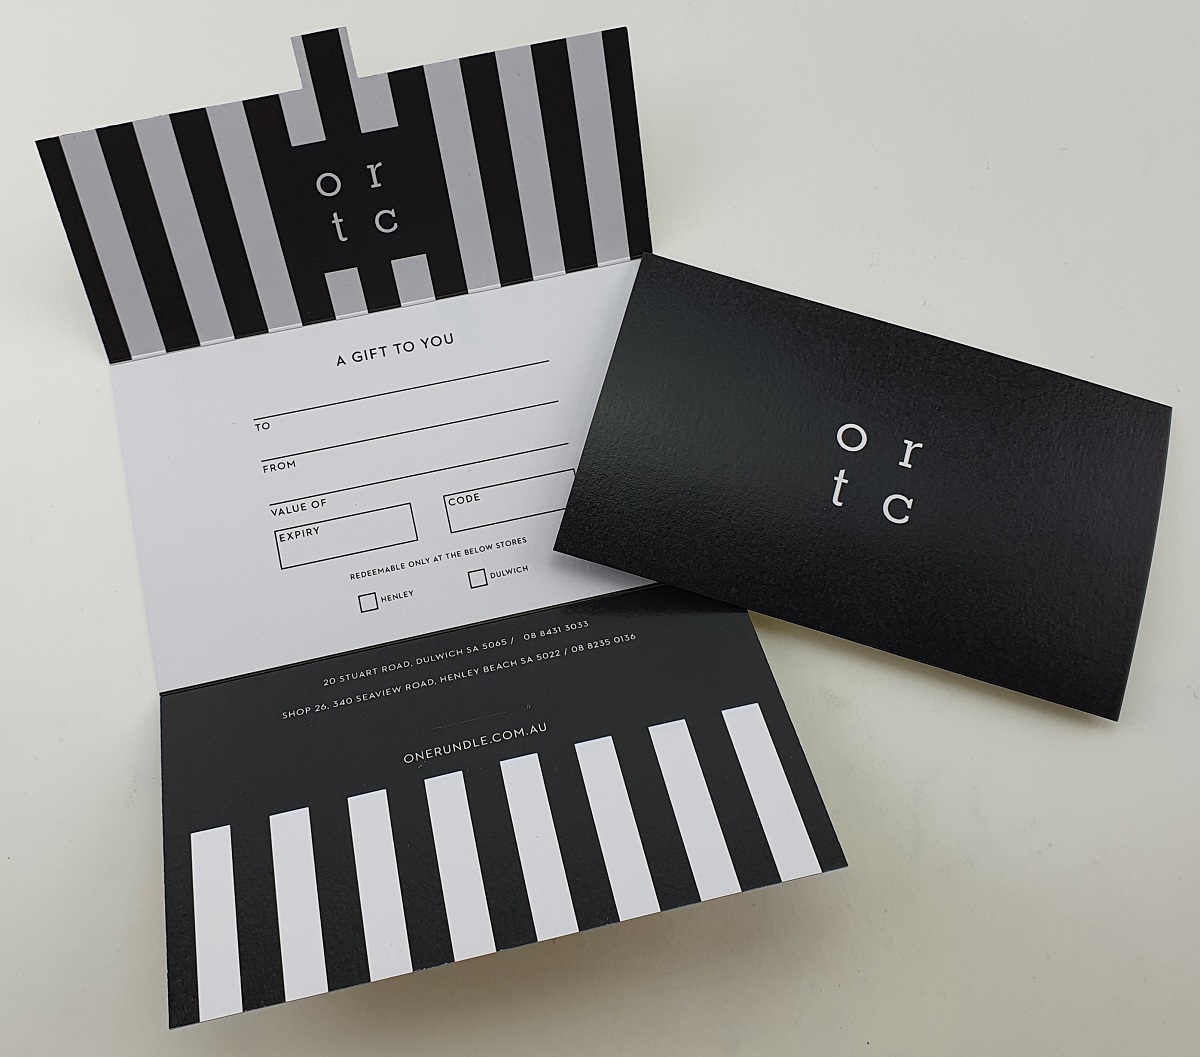 Digitally printed gift vouchers featuring the use of a rich black